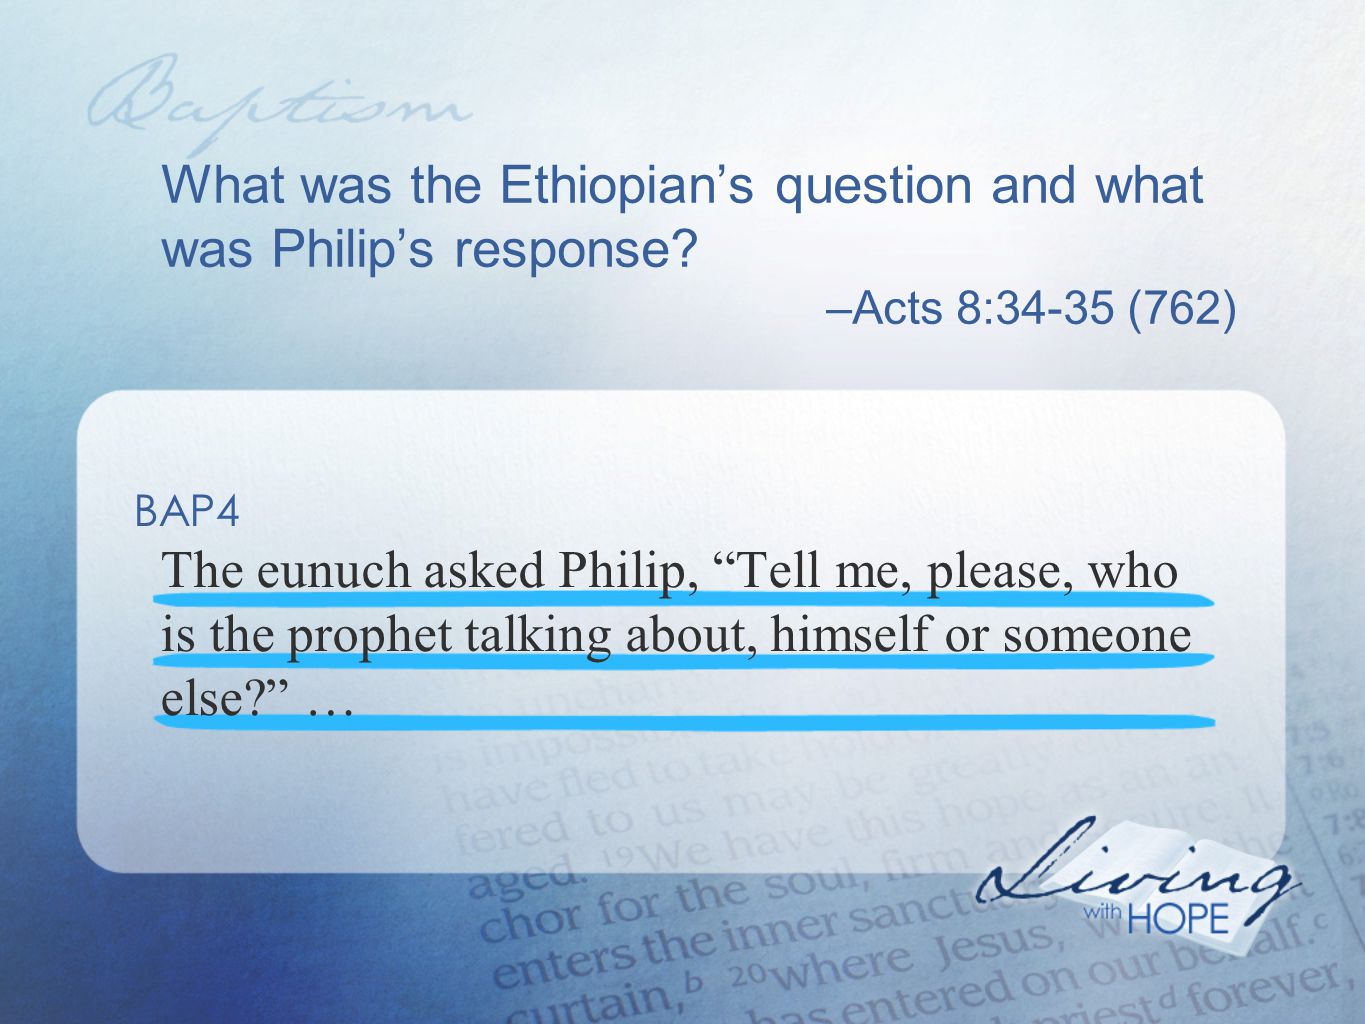 What was the Ethiopian’s question and what was Philip’s response.